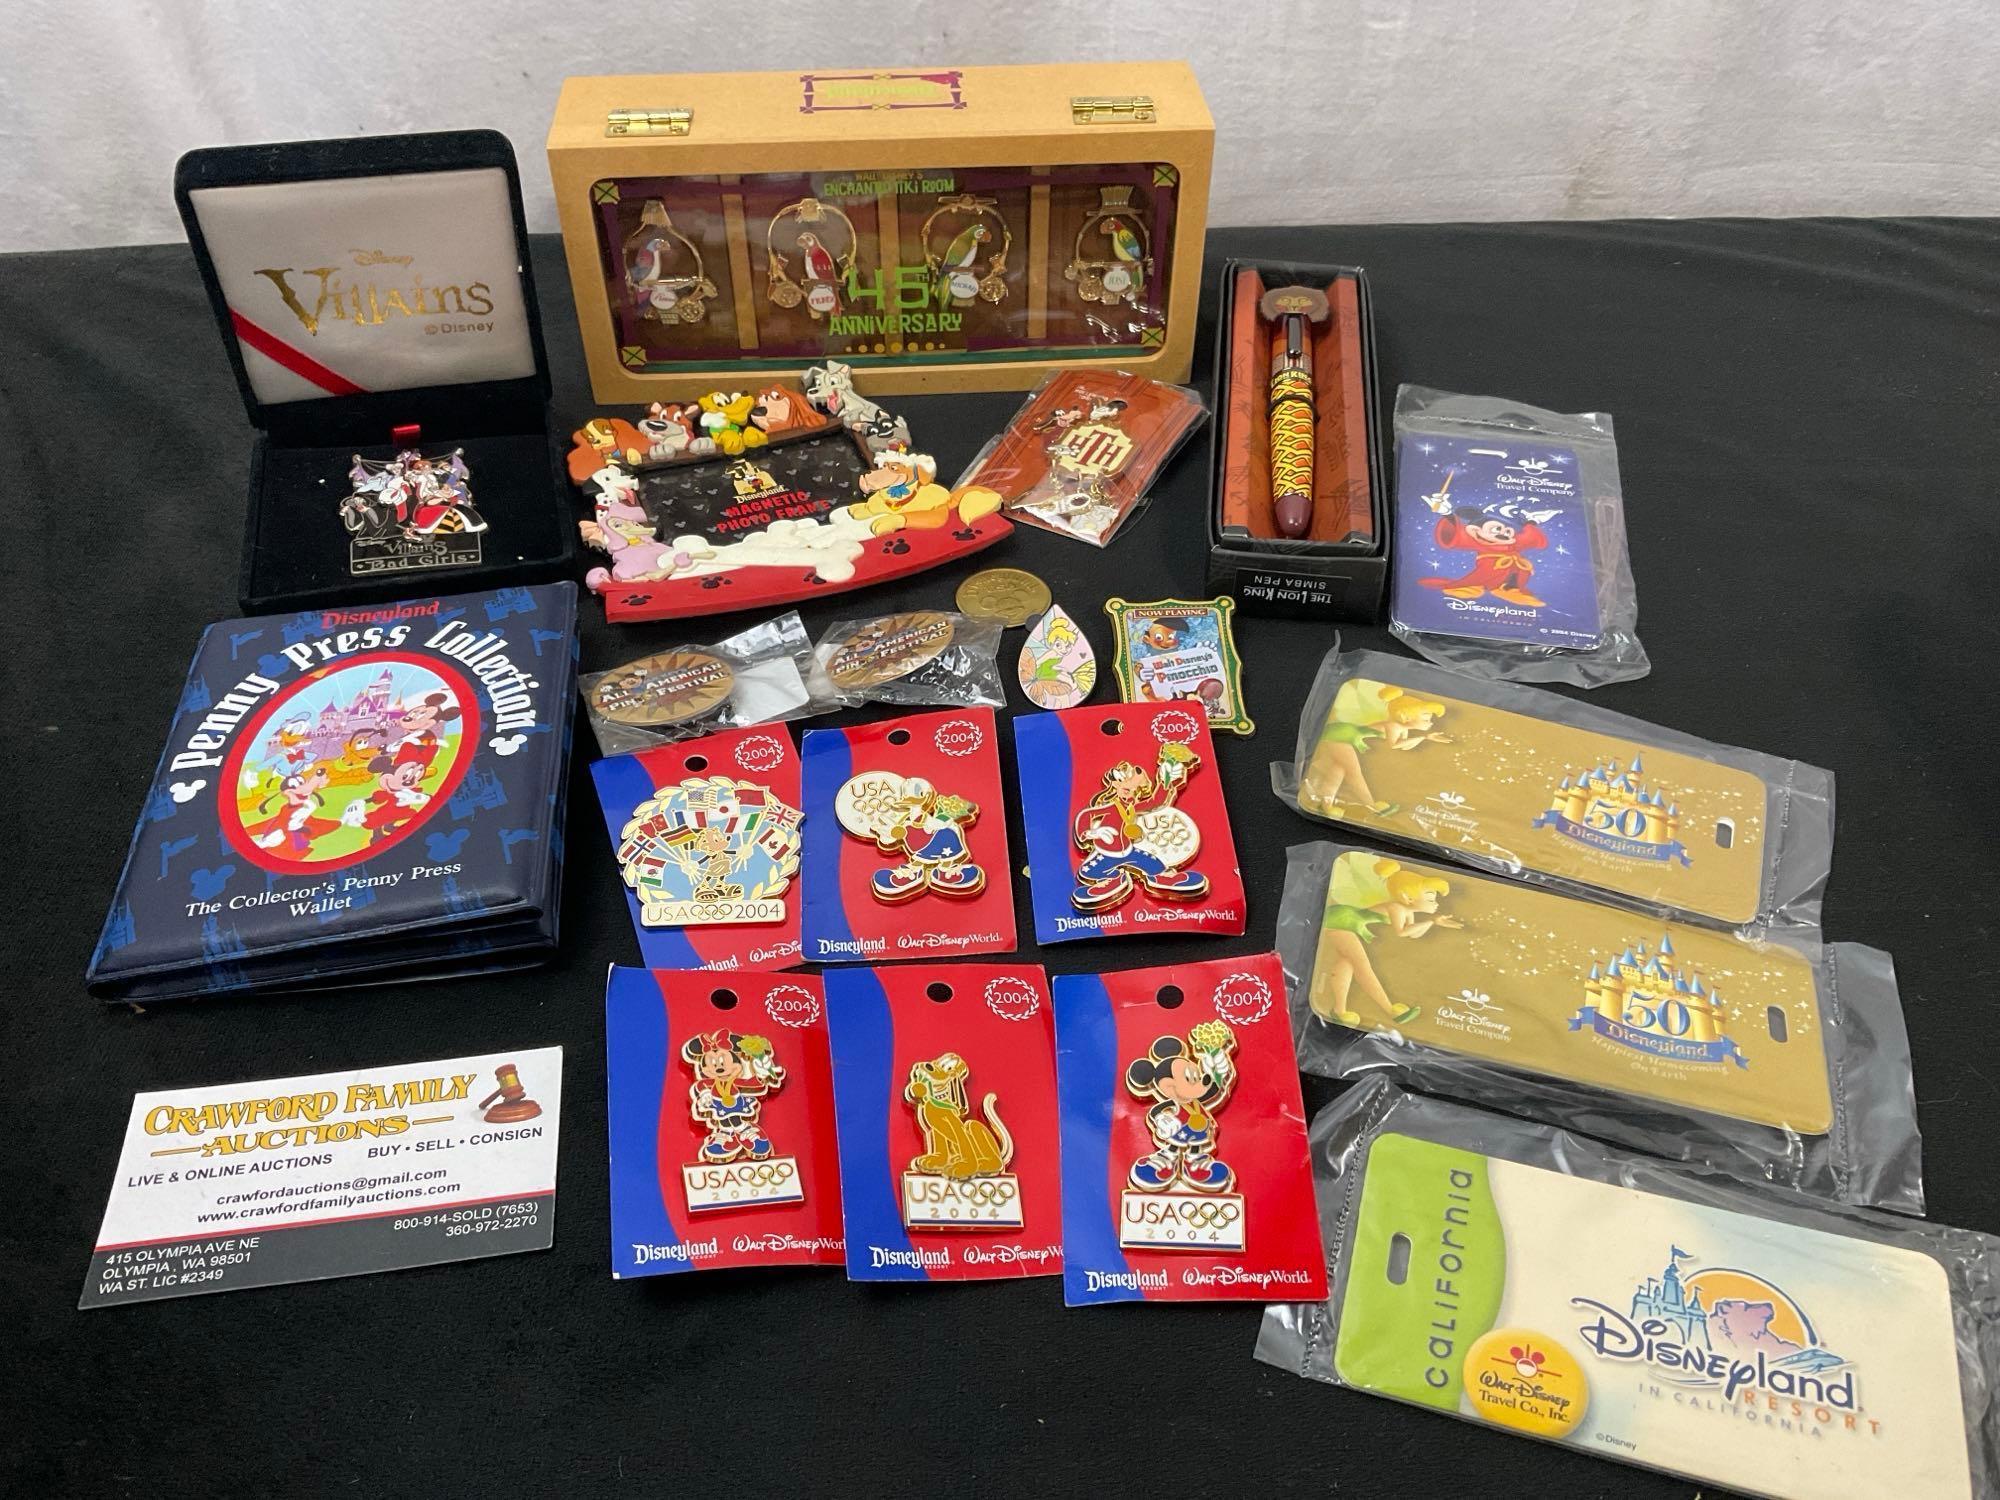 Assorted Disneyland Pins, Smashed Coins, 2008 LE Pin Set w/ box signed by Monty Maldovan